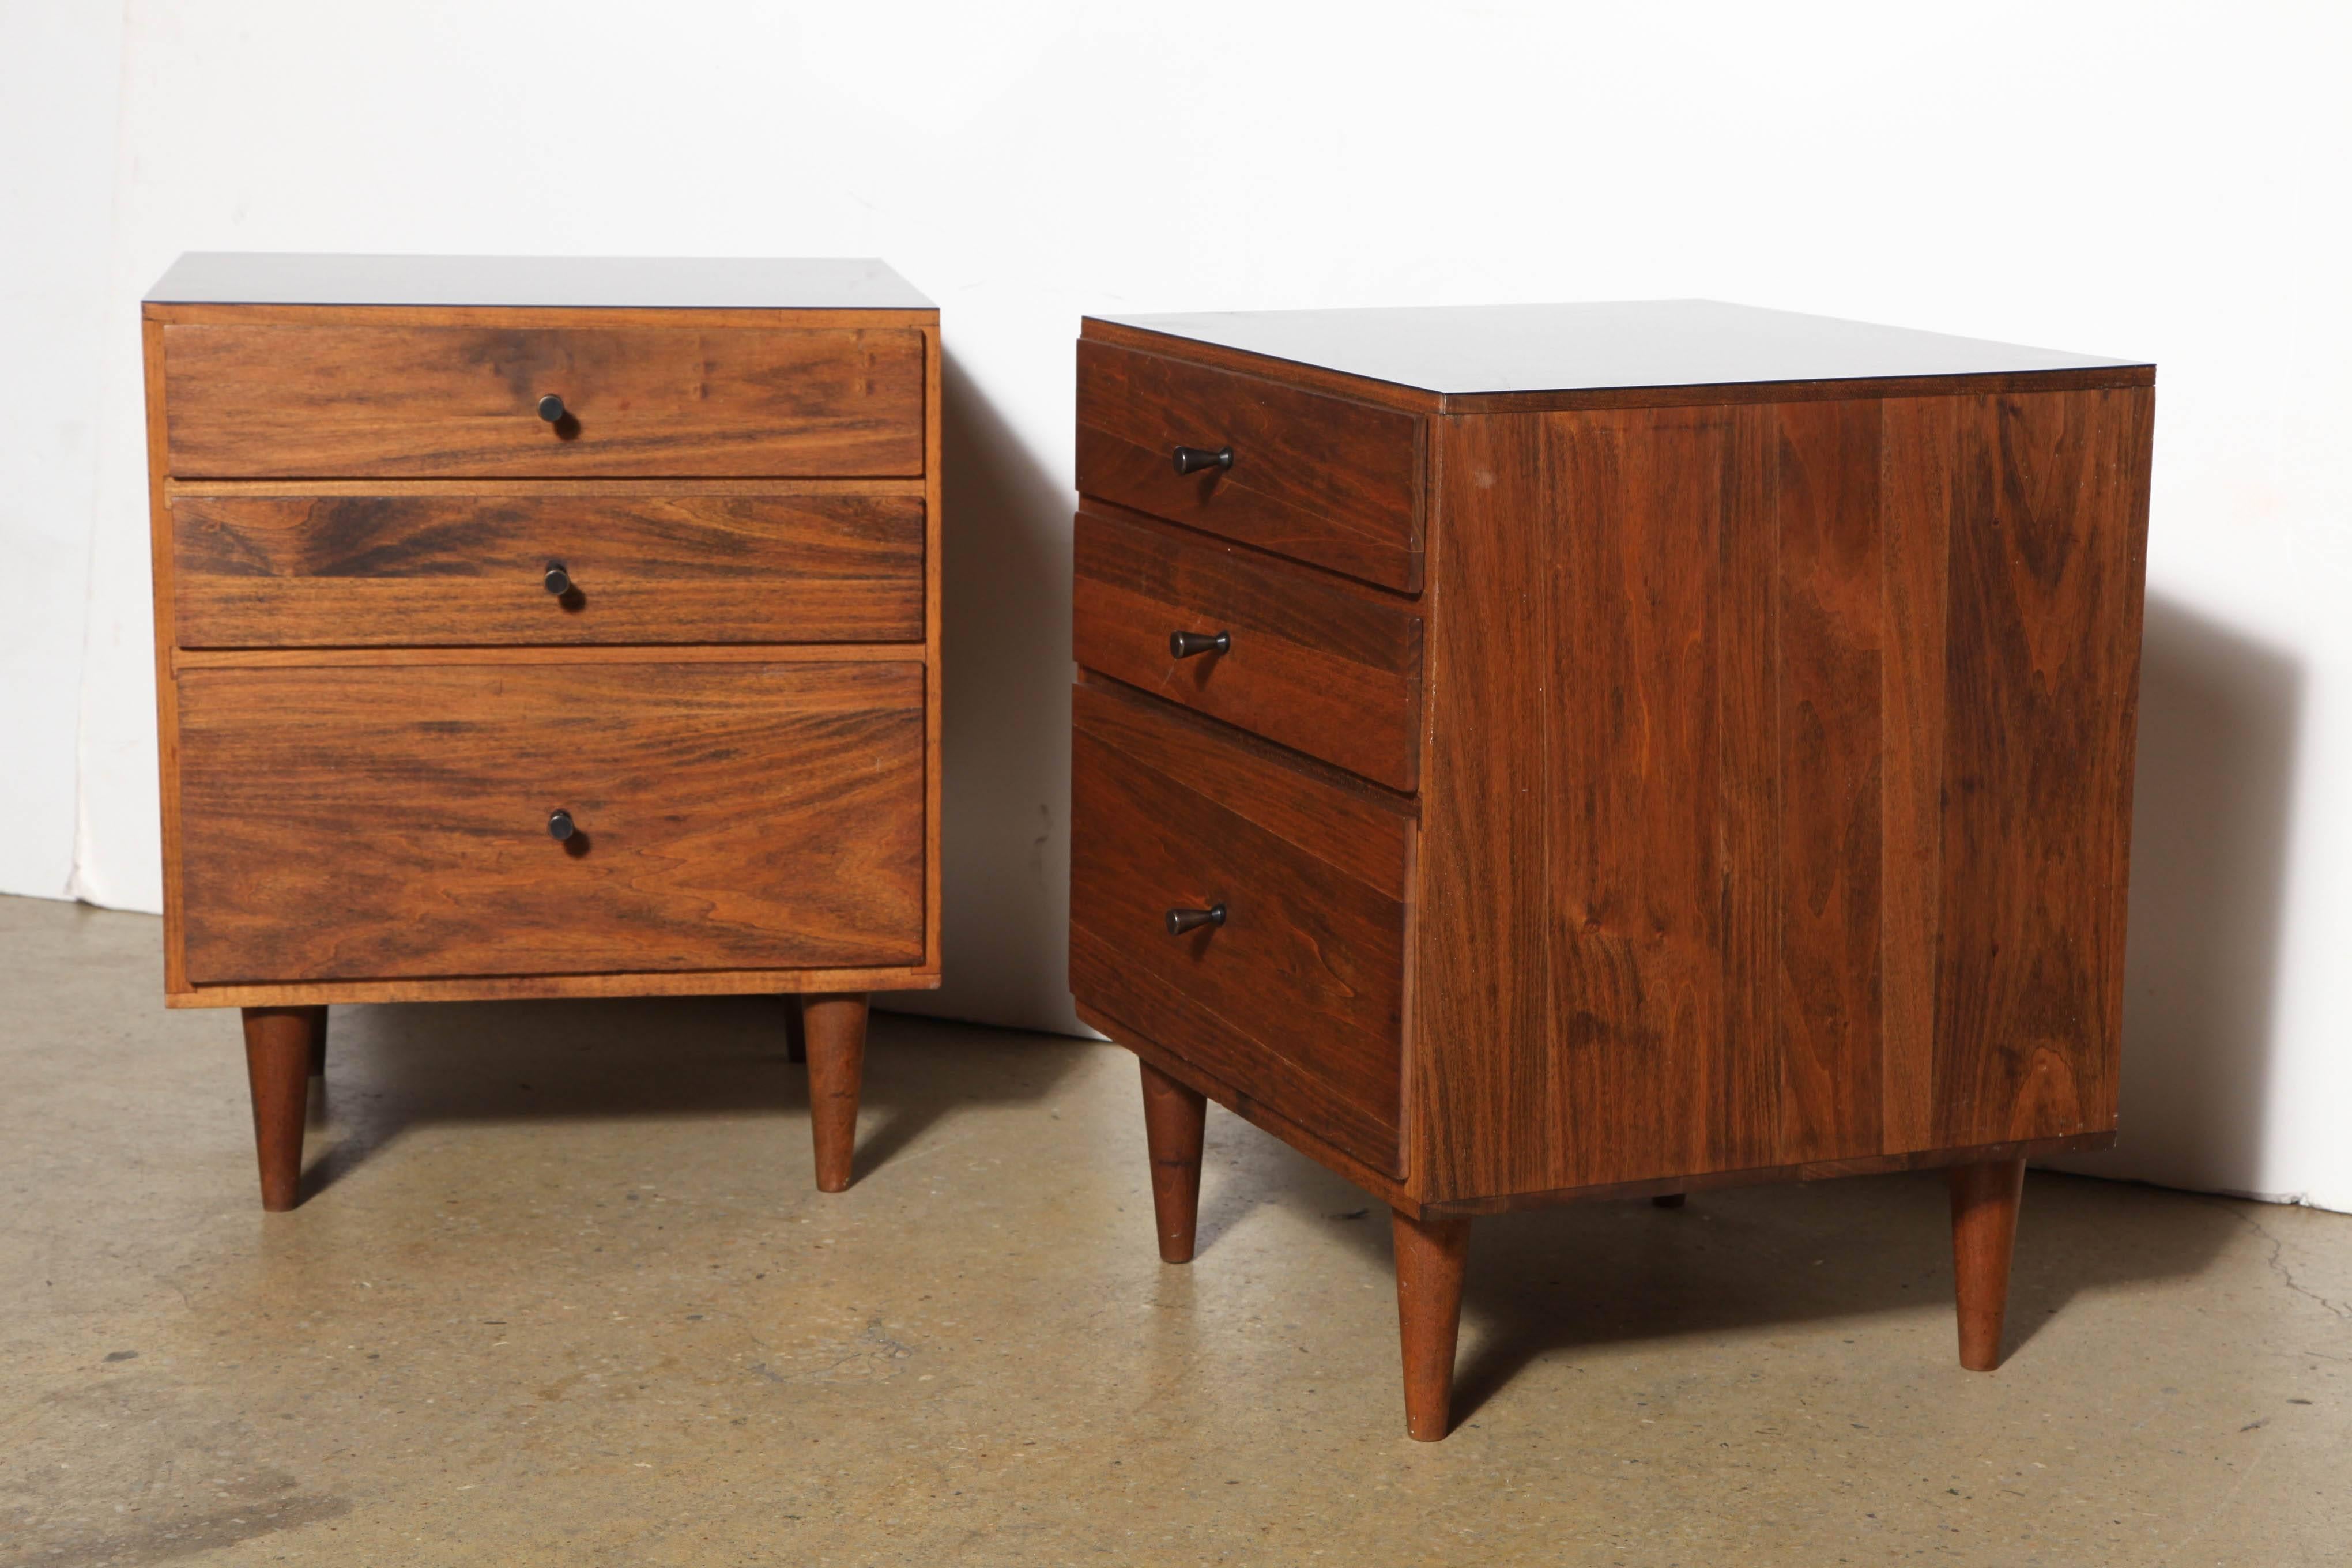 Pair of MId Century Paul McCobb Dark Black Walnut and Black Micarta Lower Bedside Tables. Solid. Compact. Heavy. Featuring a rectangular form in Black Walnut, three drawers, four (5.5H) dowel legs, Black Formica surface and classic McCobb conical